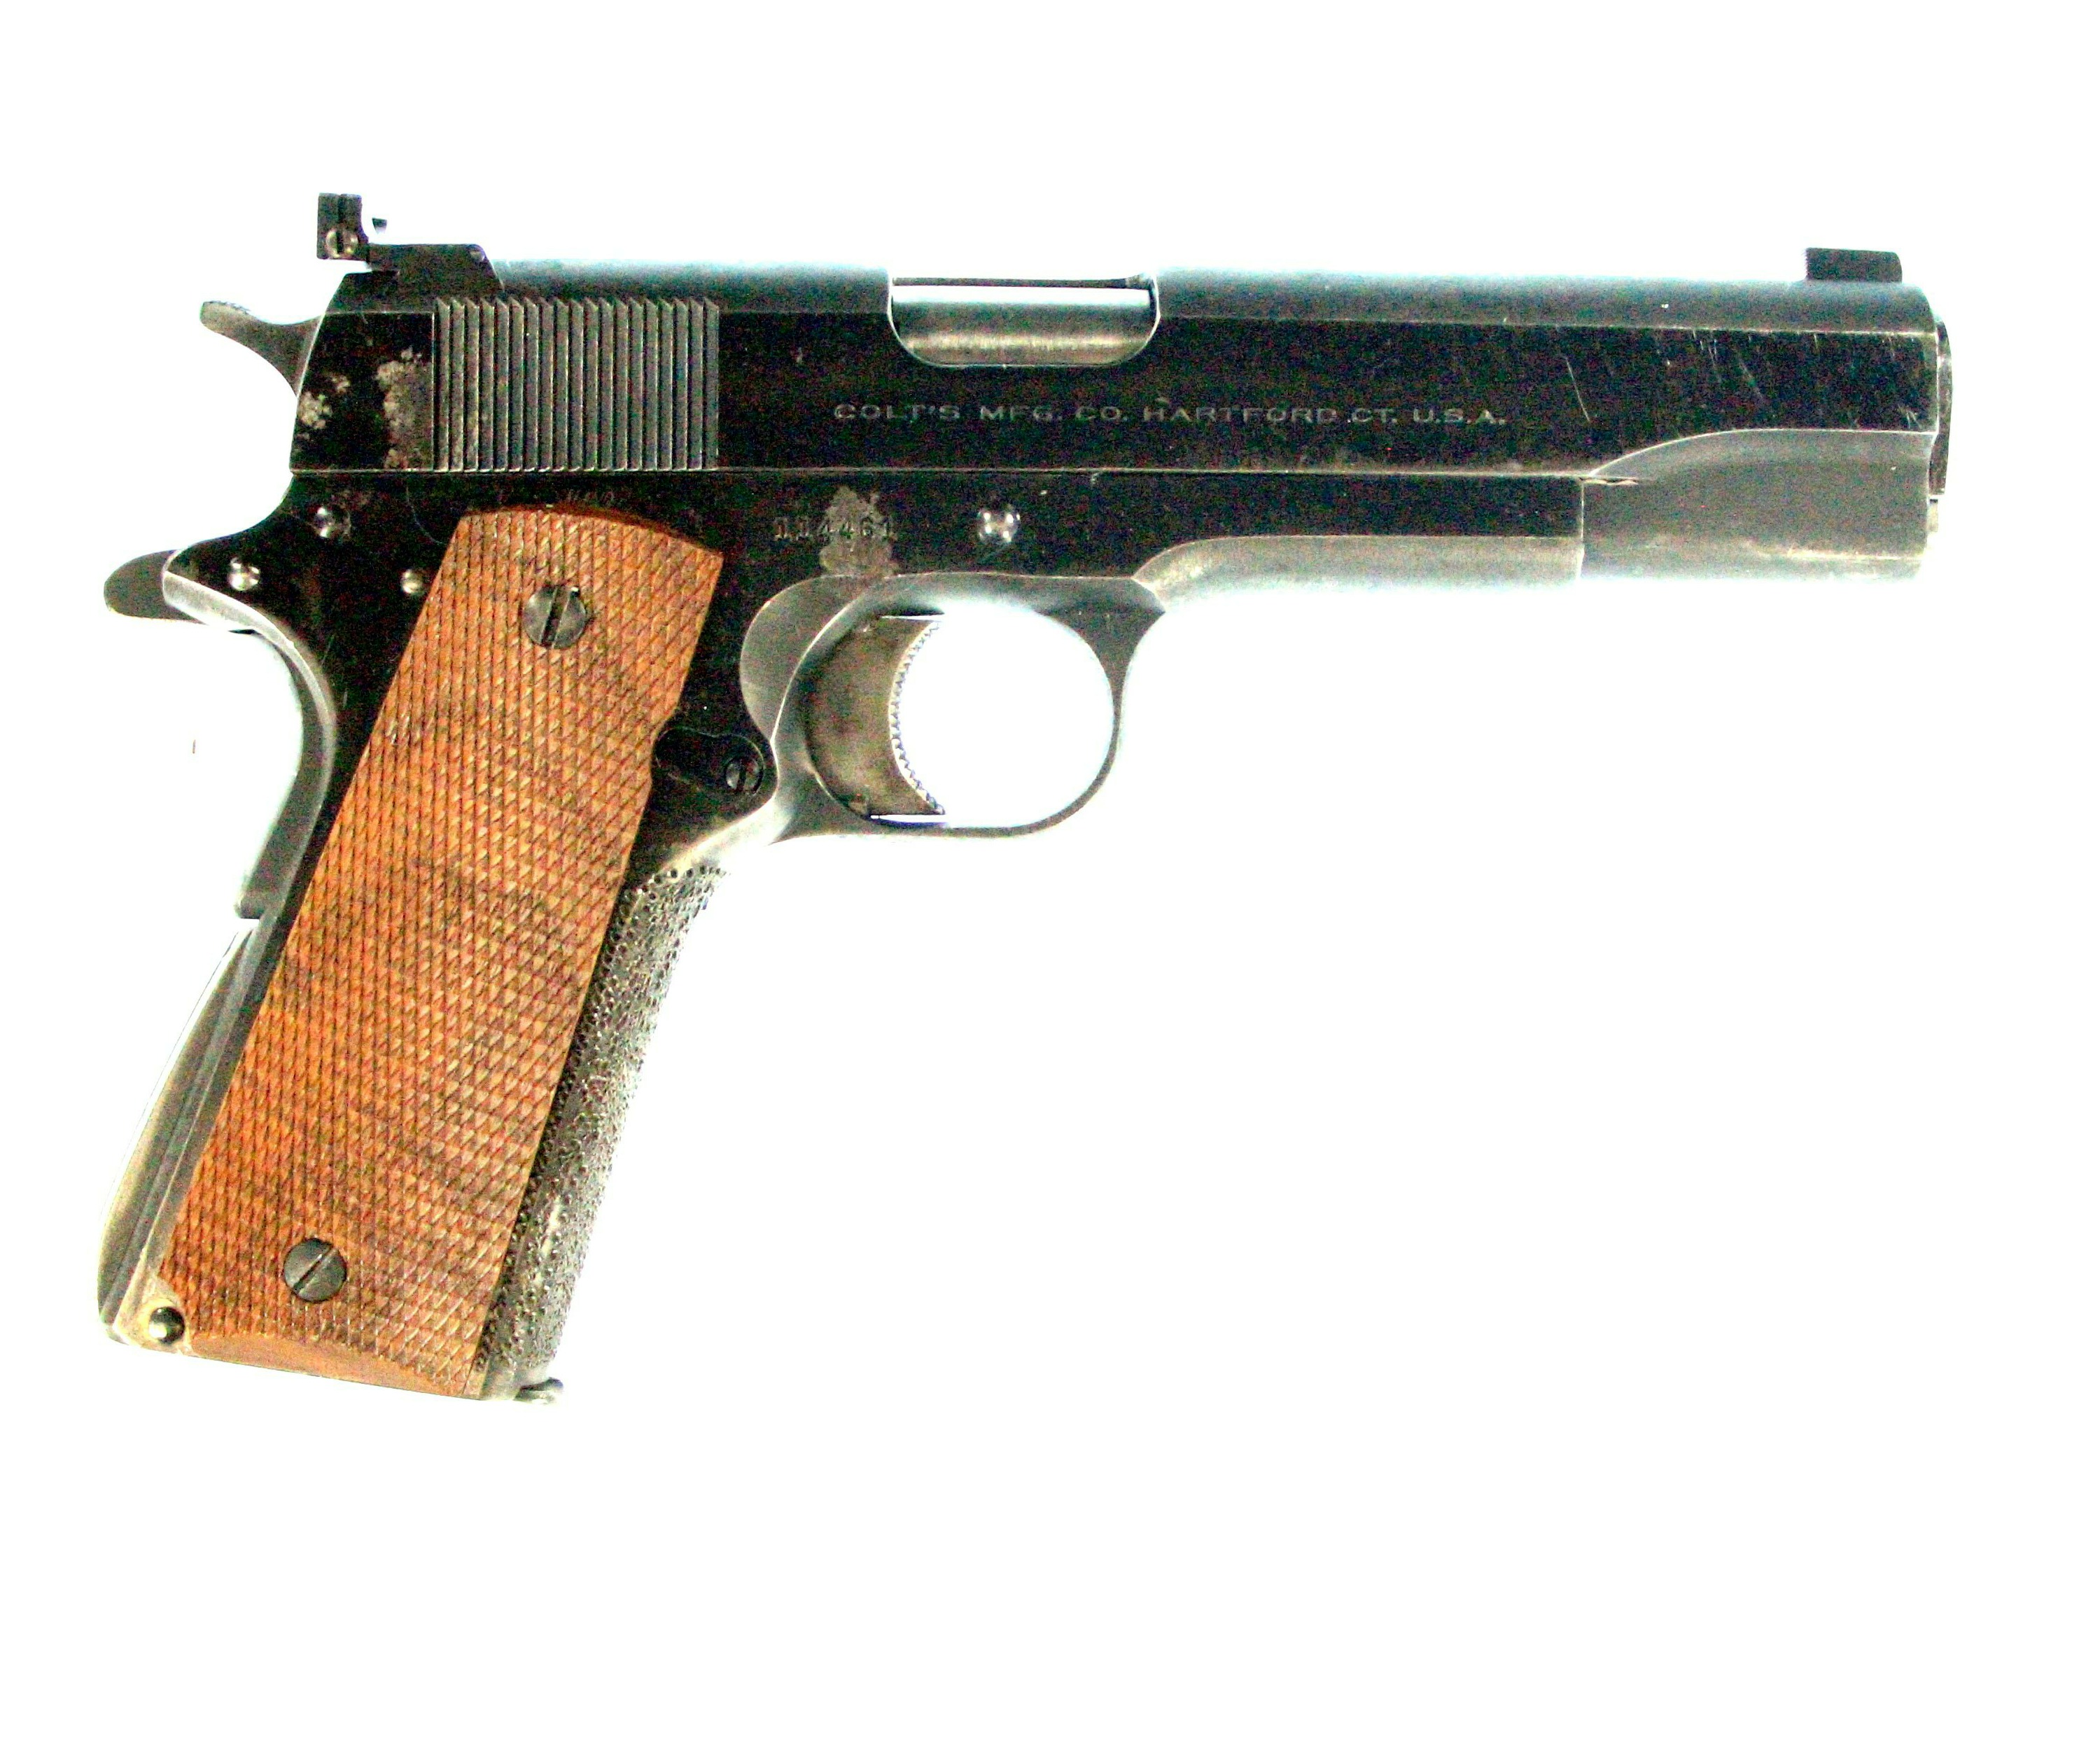 Colt Government Model Conversion to 38 Special Mid-Range wadcutter, 11461, Mfg. 1931